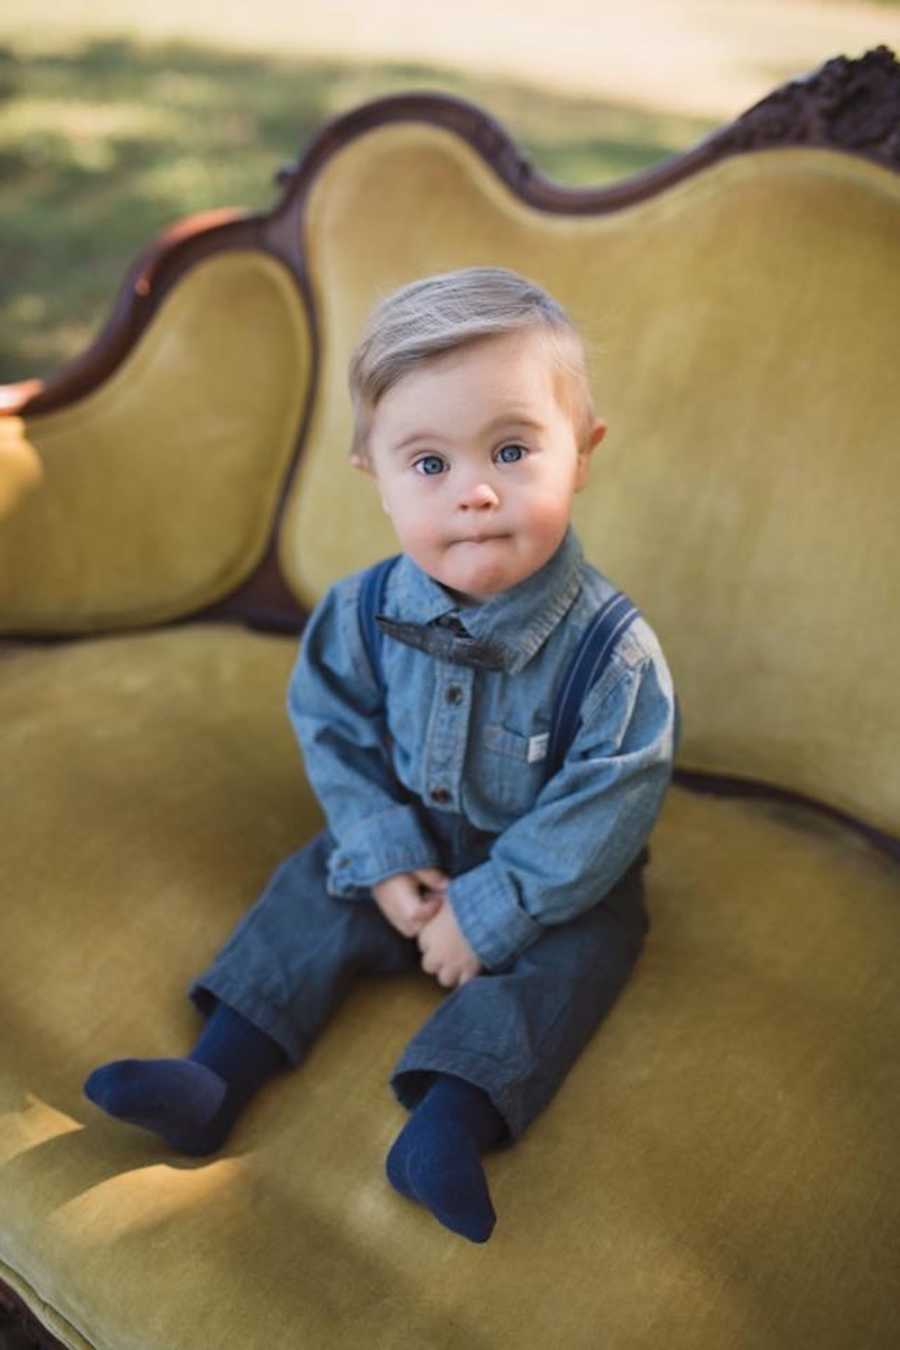 Little boy with down syndrome sits on green velvet couch wearing all denim outfit